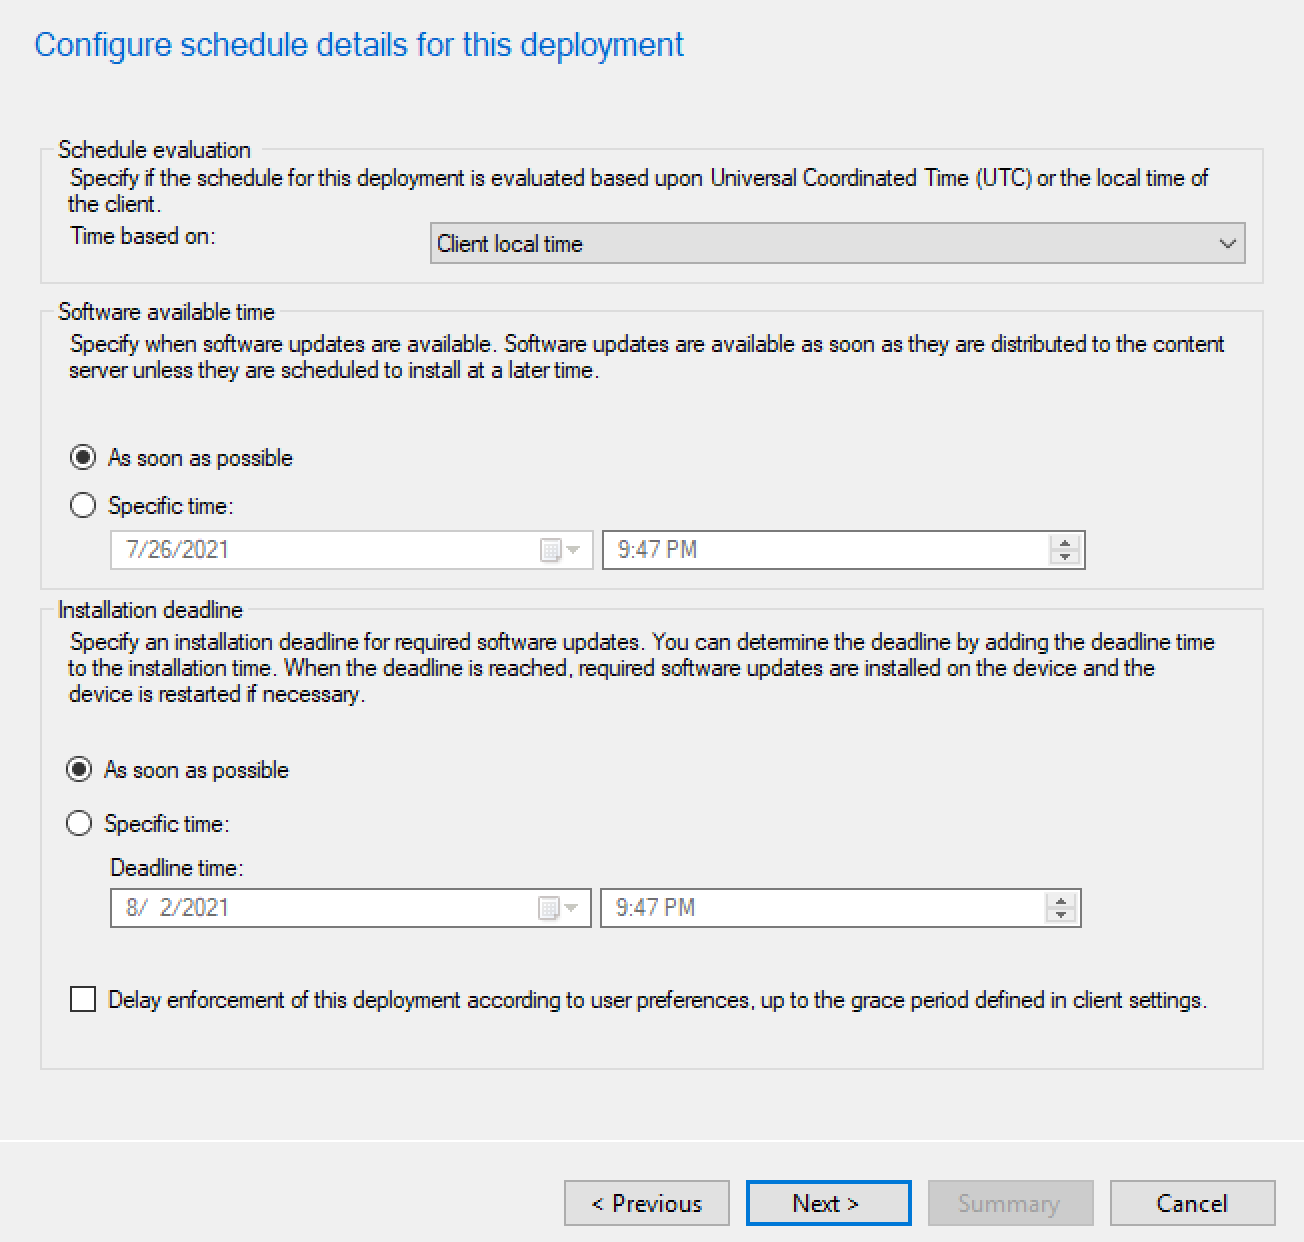 This is a screenshot of schedule details for an example deployment with Microsoft Endpoint Configuration Manager.